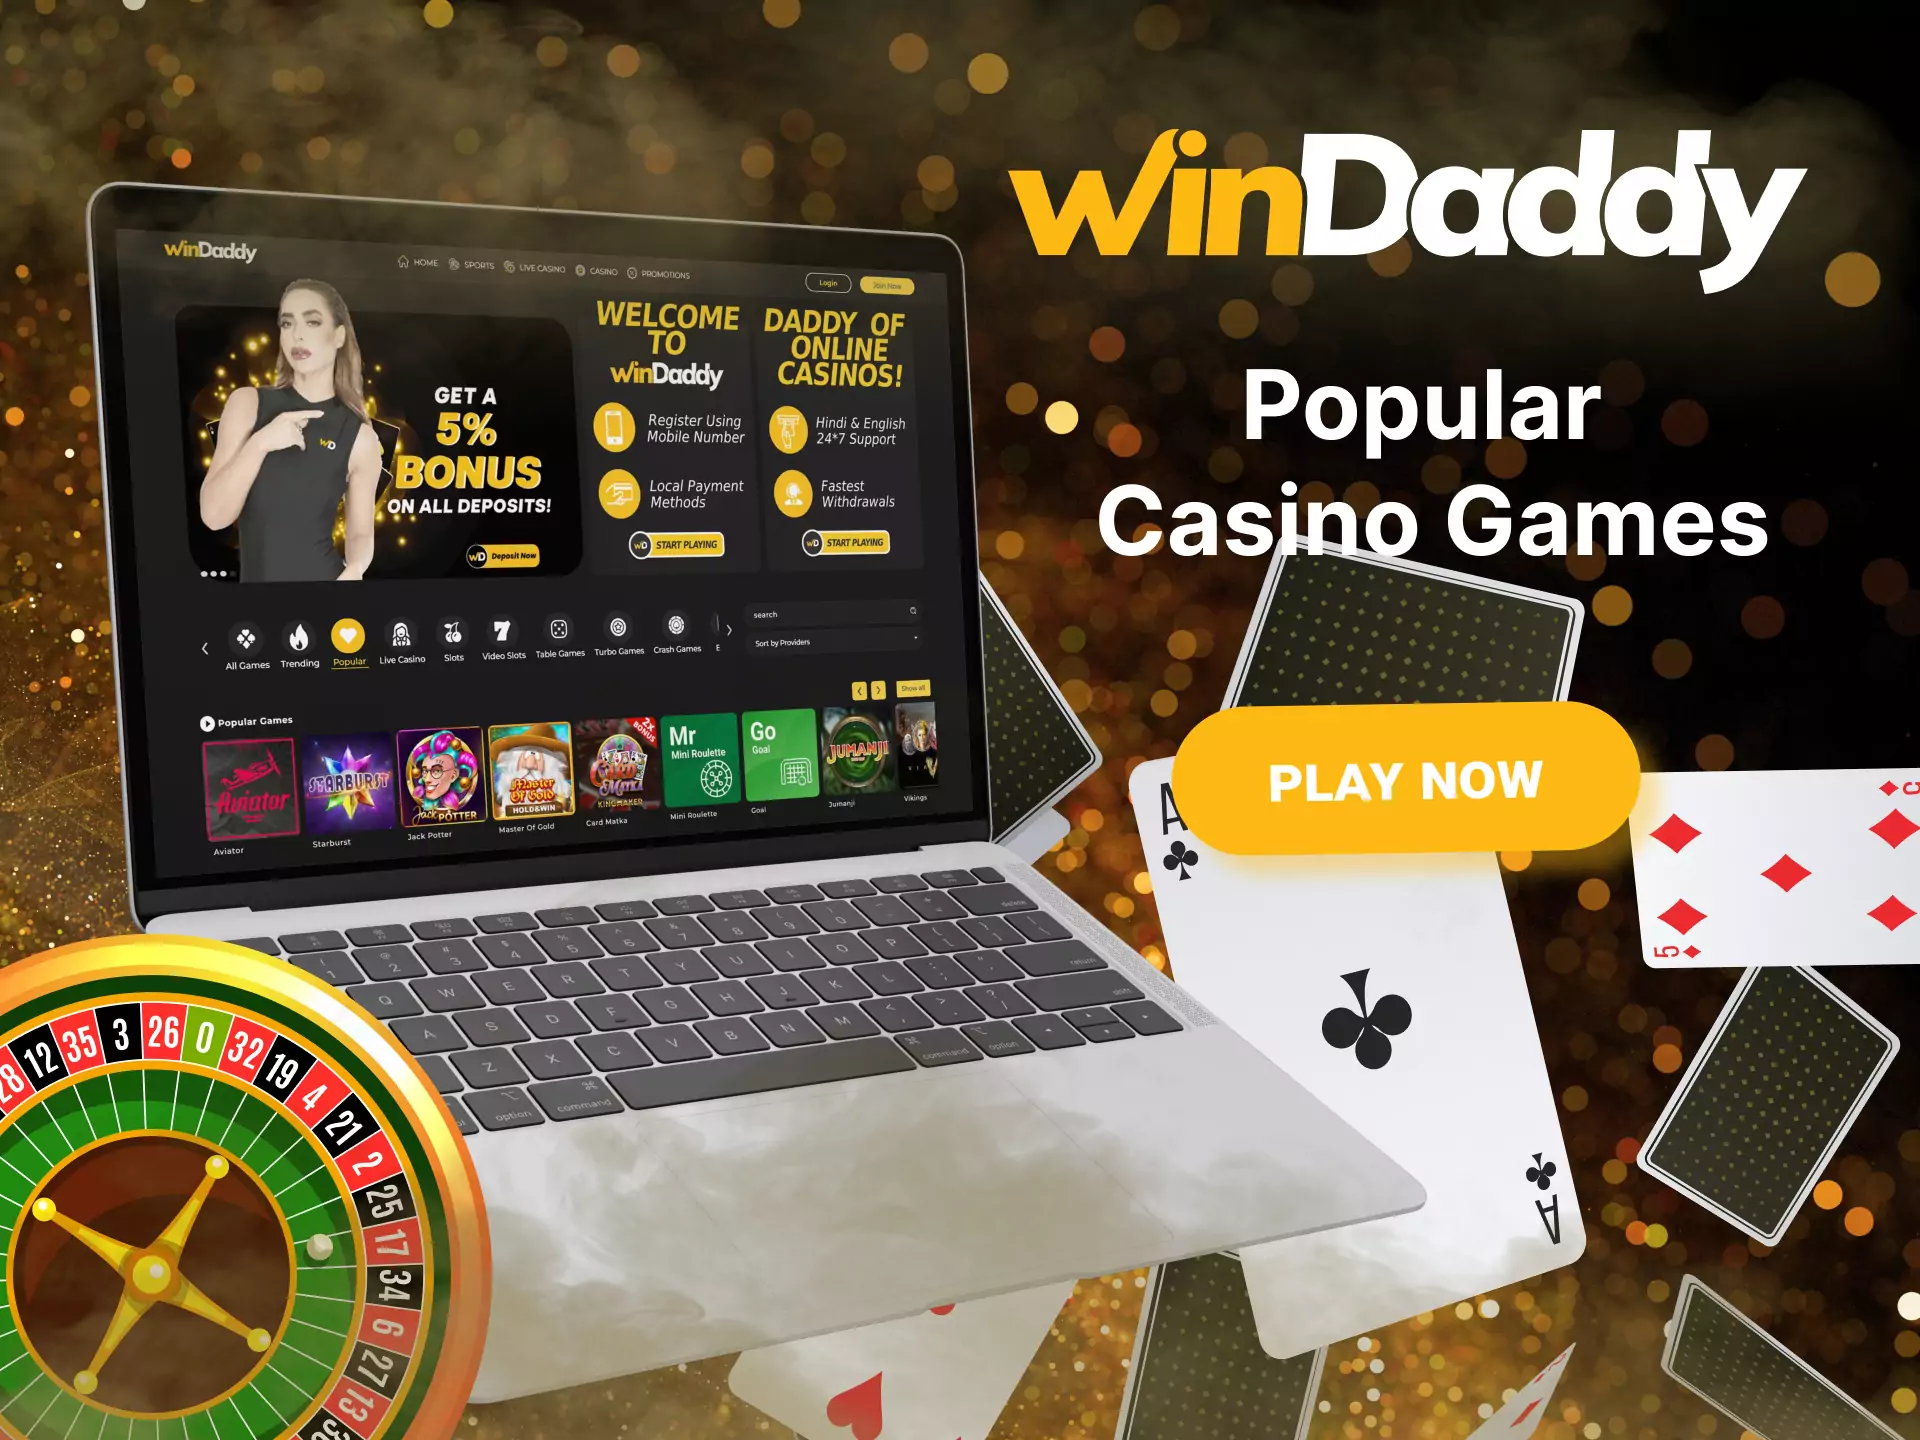 Try playing the popular Windaddy casino games.